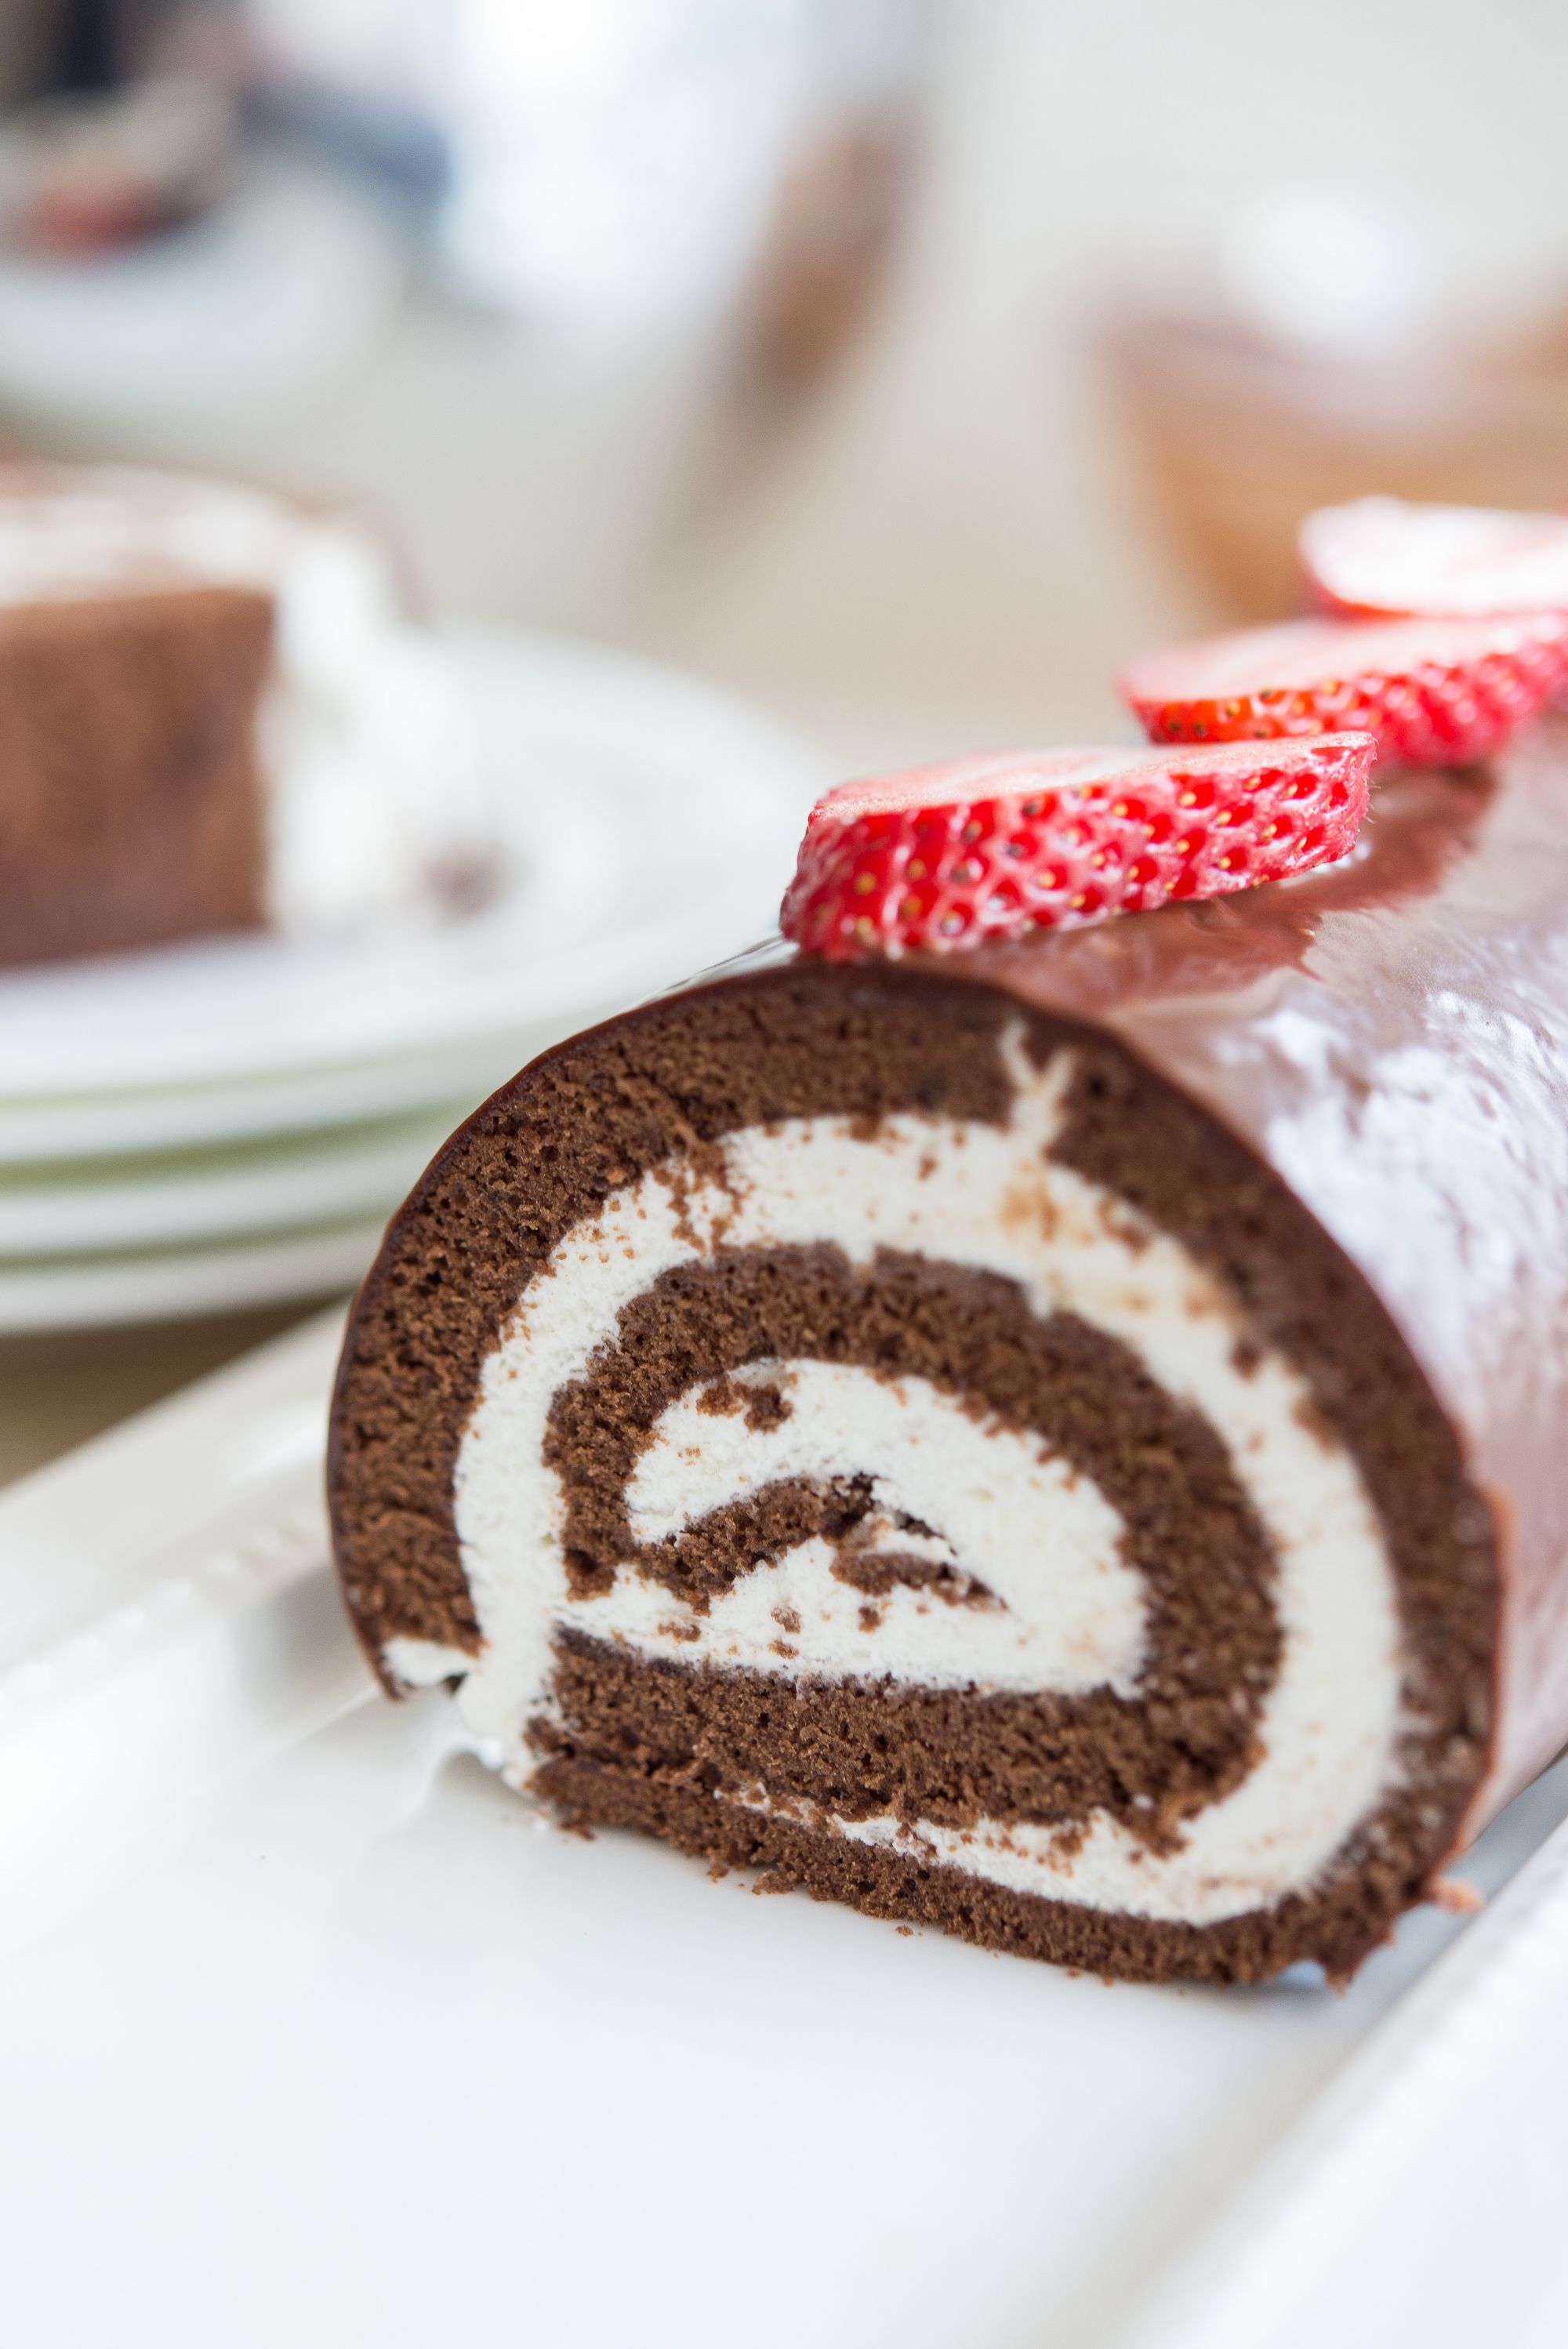 Patterned Chocolate Swiss Roll - Spill the Spices